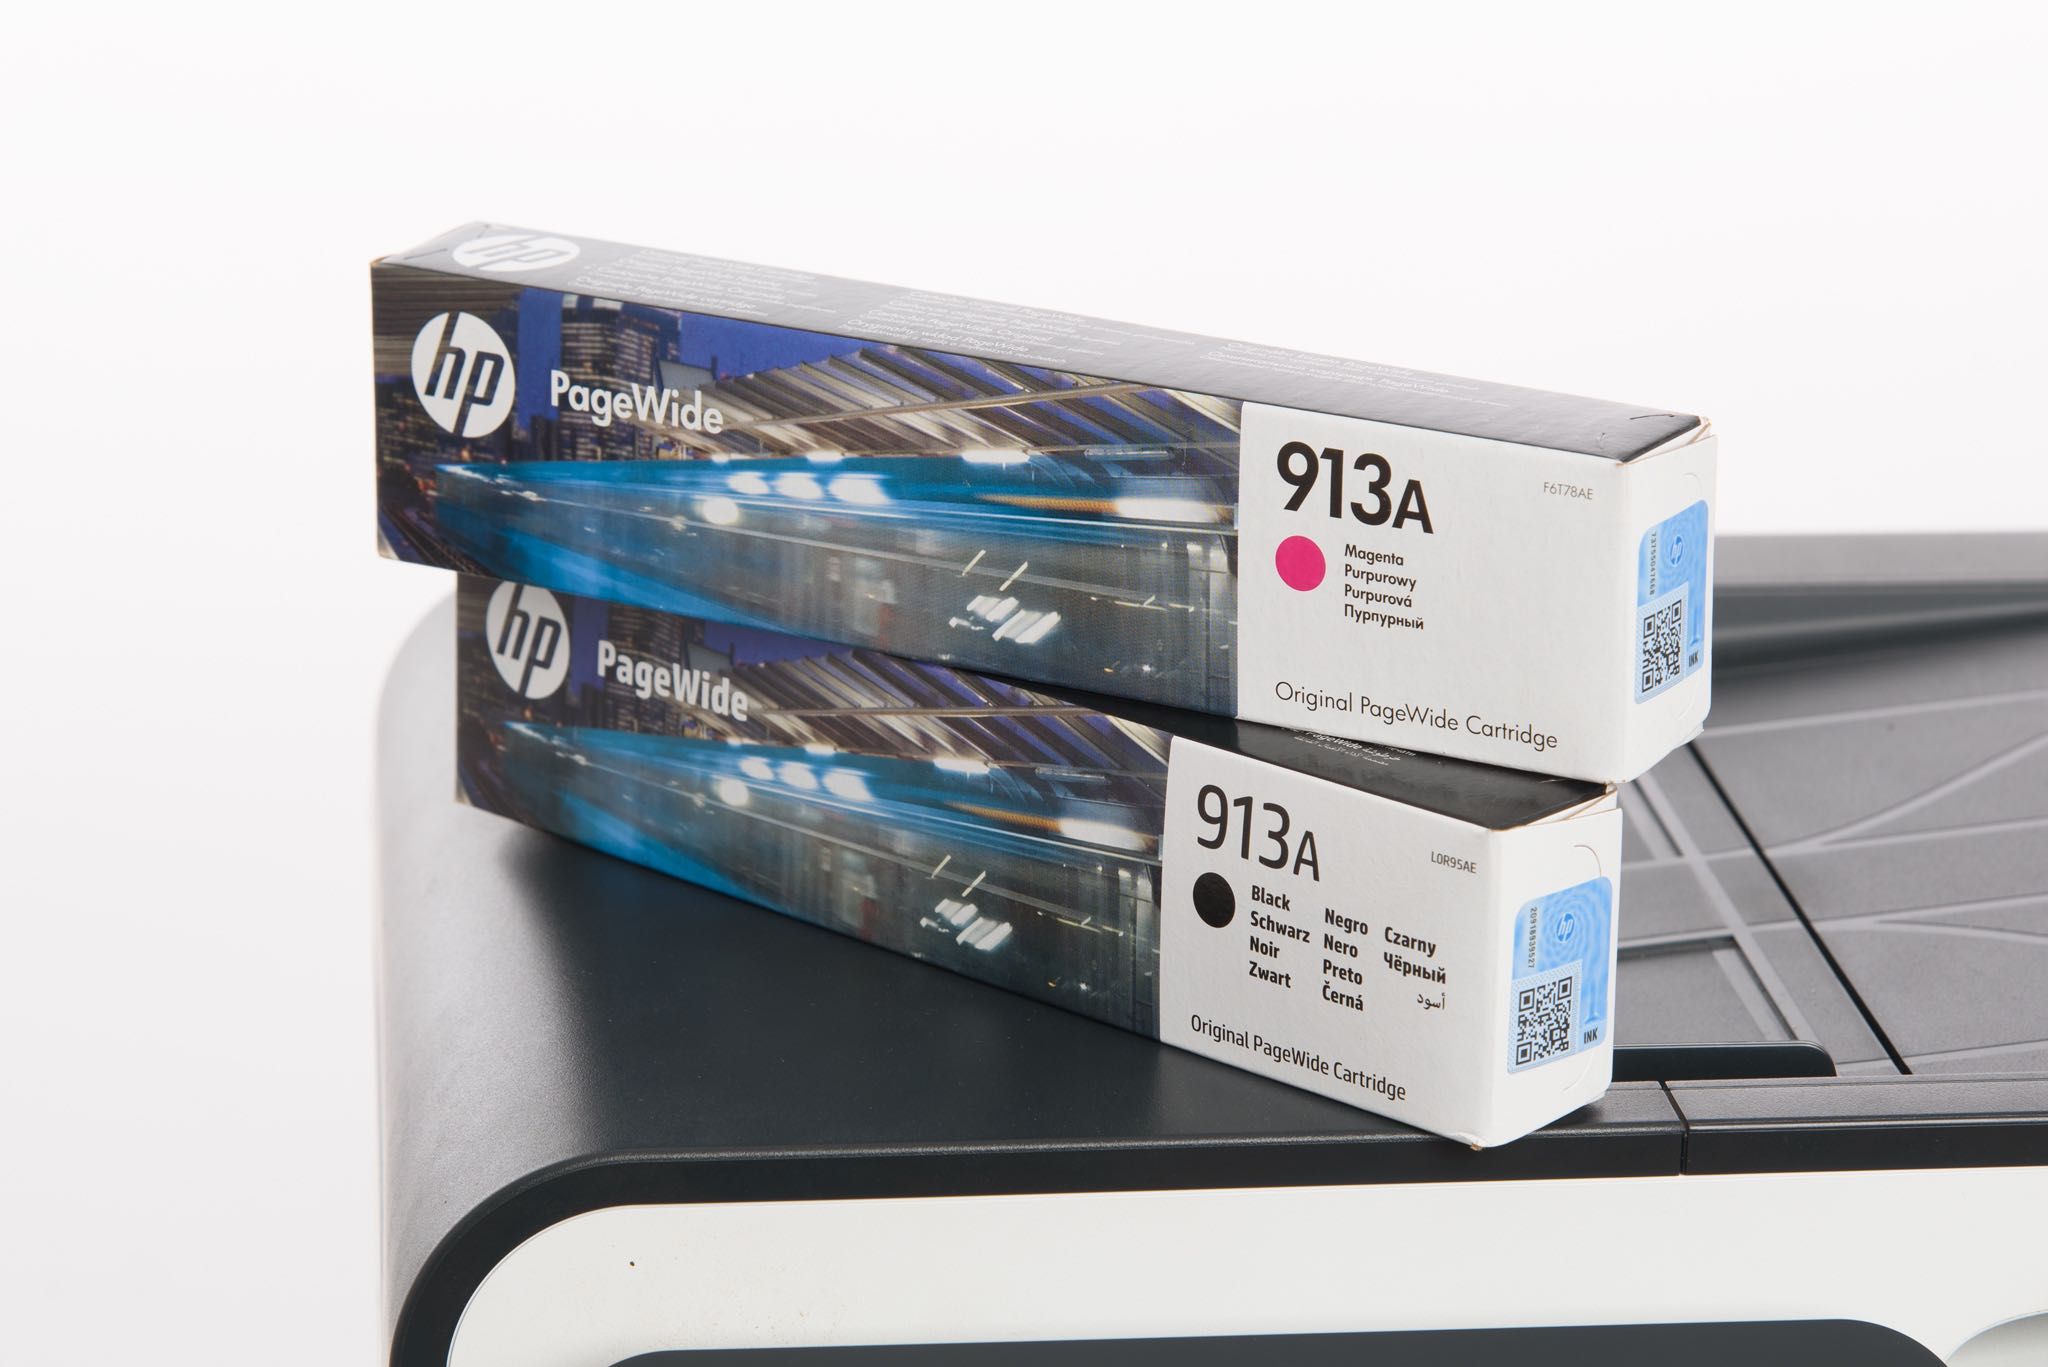 HP PageWide MFP 377dw